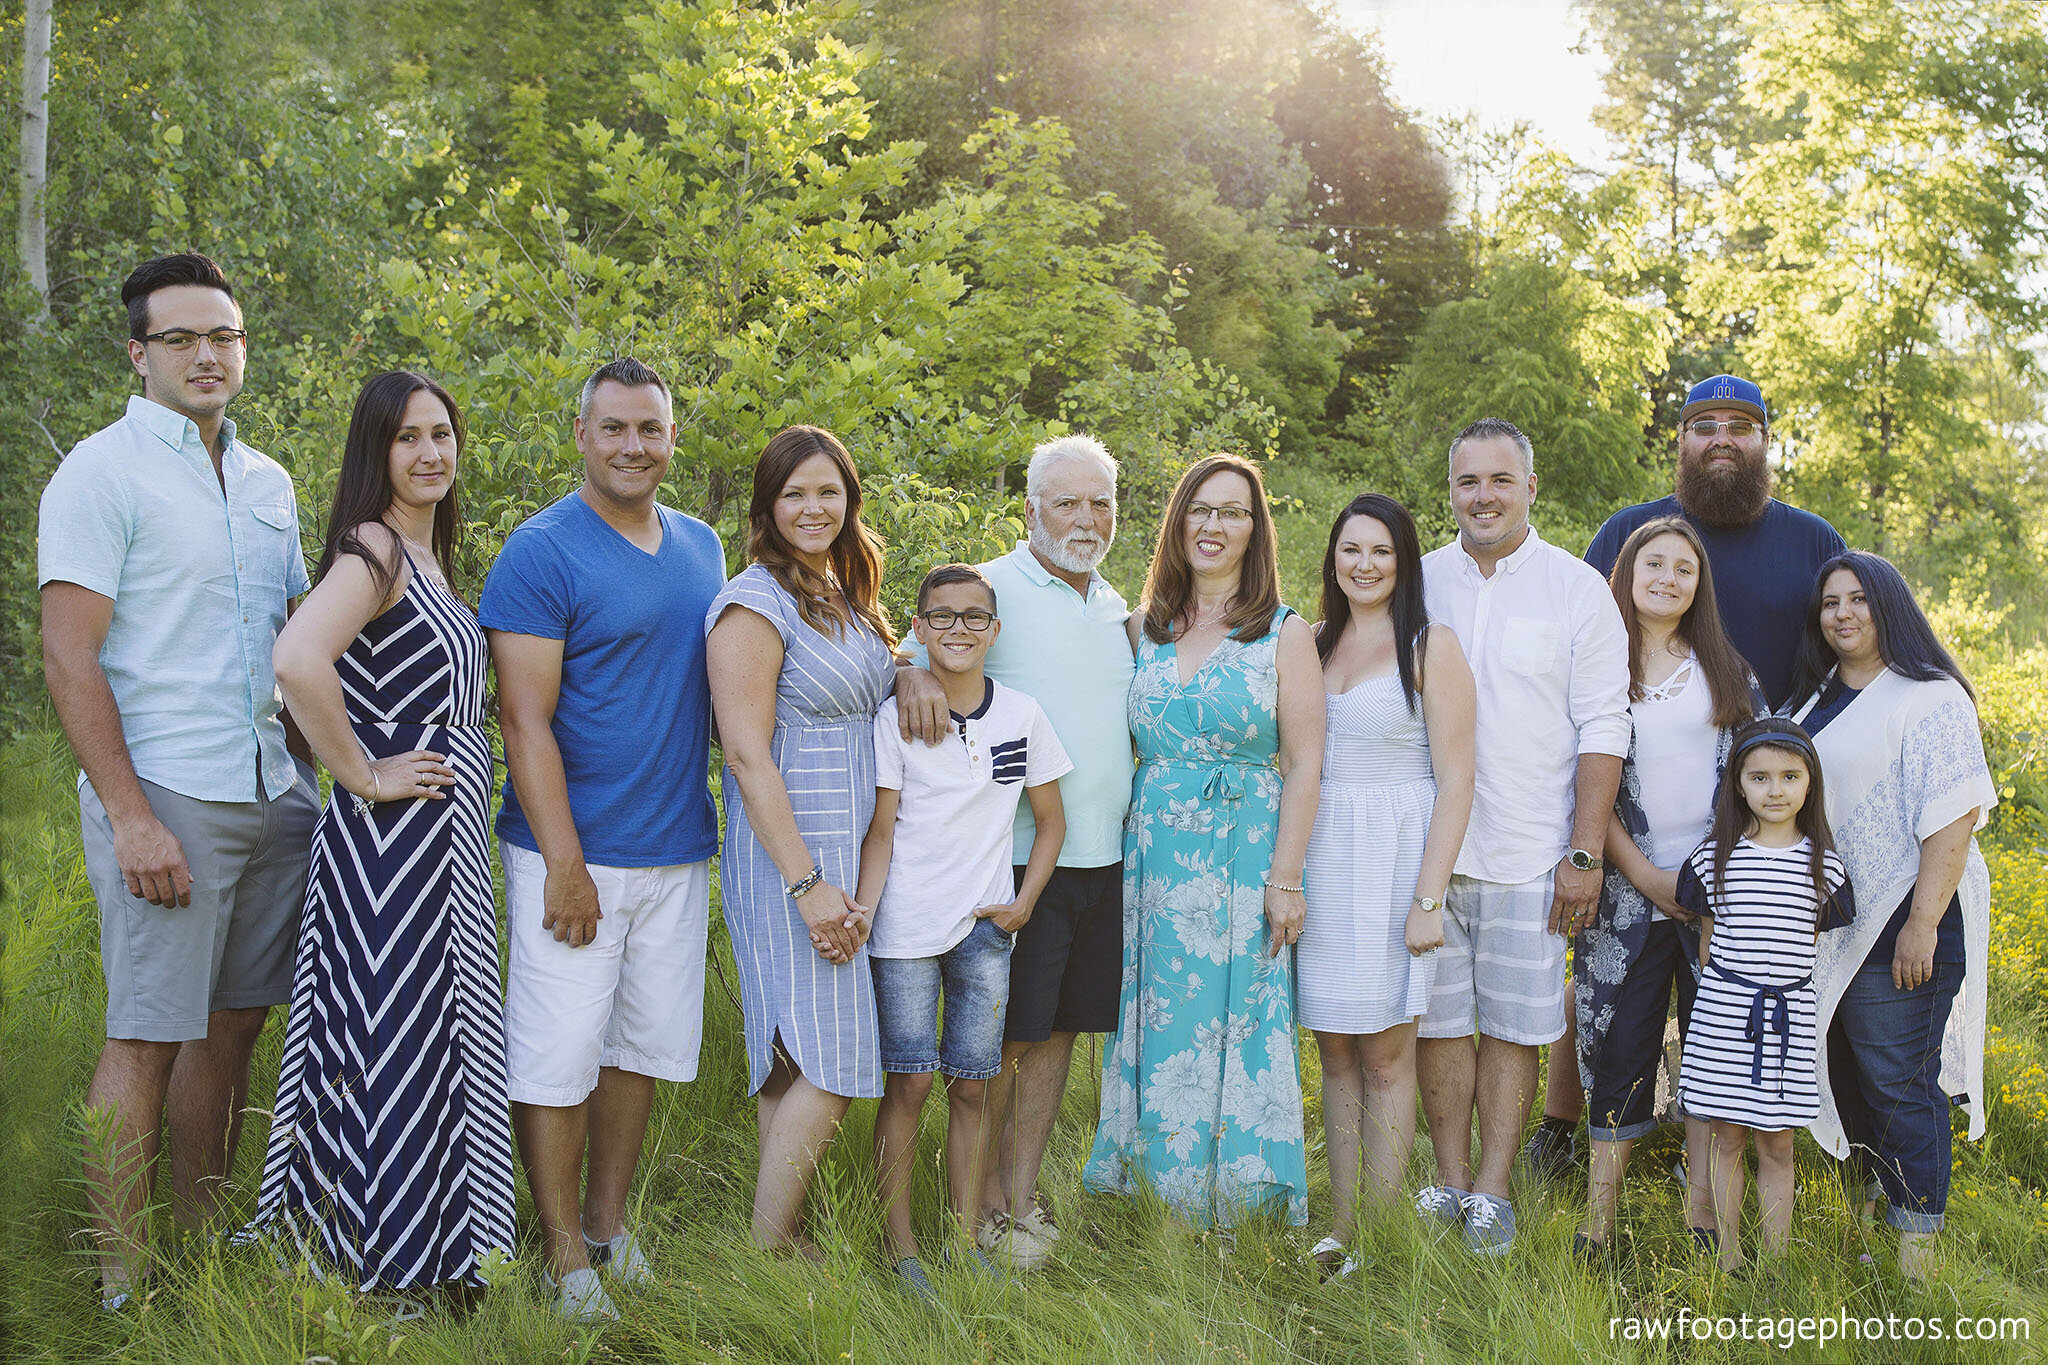 london_ontario_family_photographer-extended_family_session-grandparents-cousins-backyard_session-civic_gardens-raw_footage_photography-001.jpg